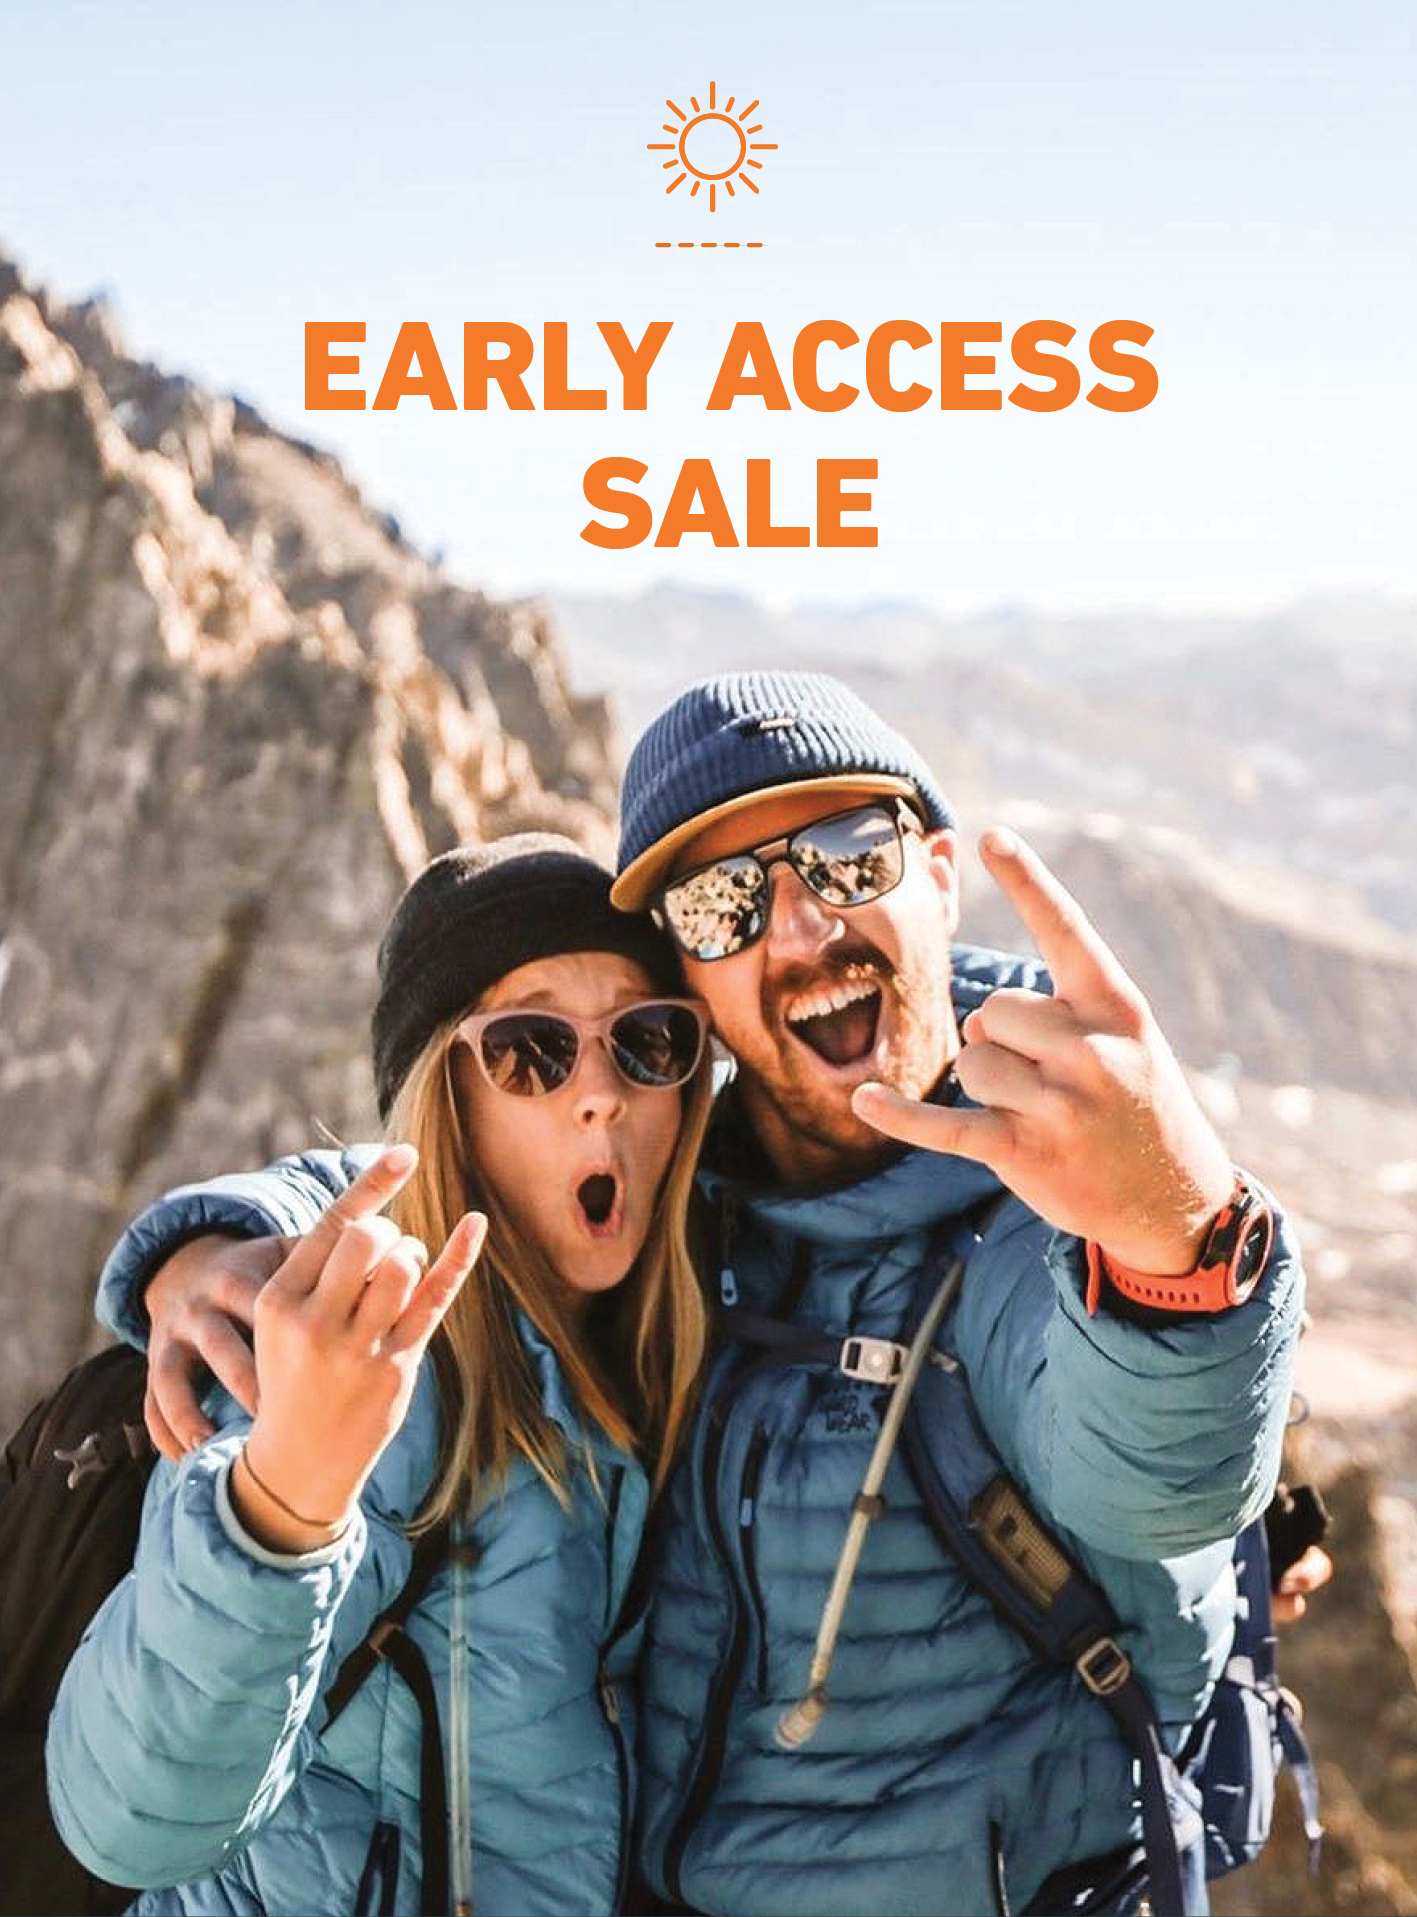 EARLY ACCESS SALE